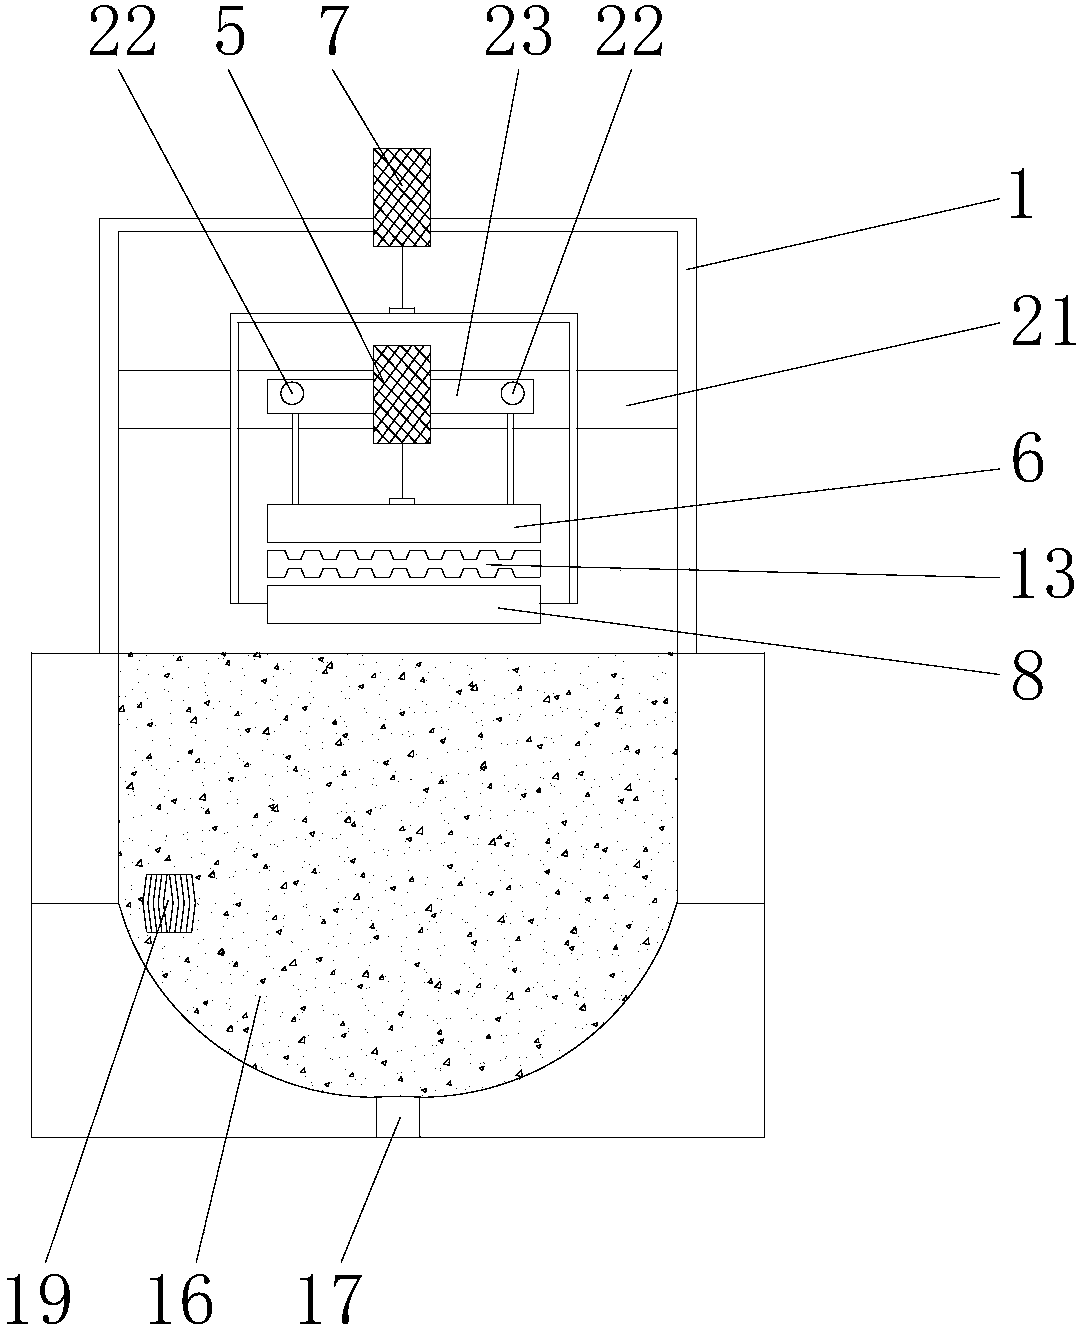 Integrated paper pulp molding equipment and method